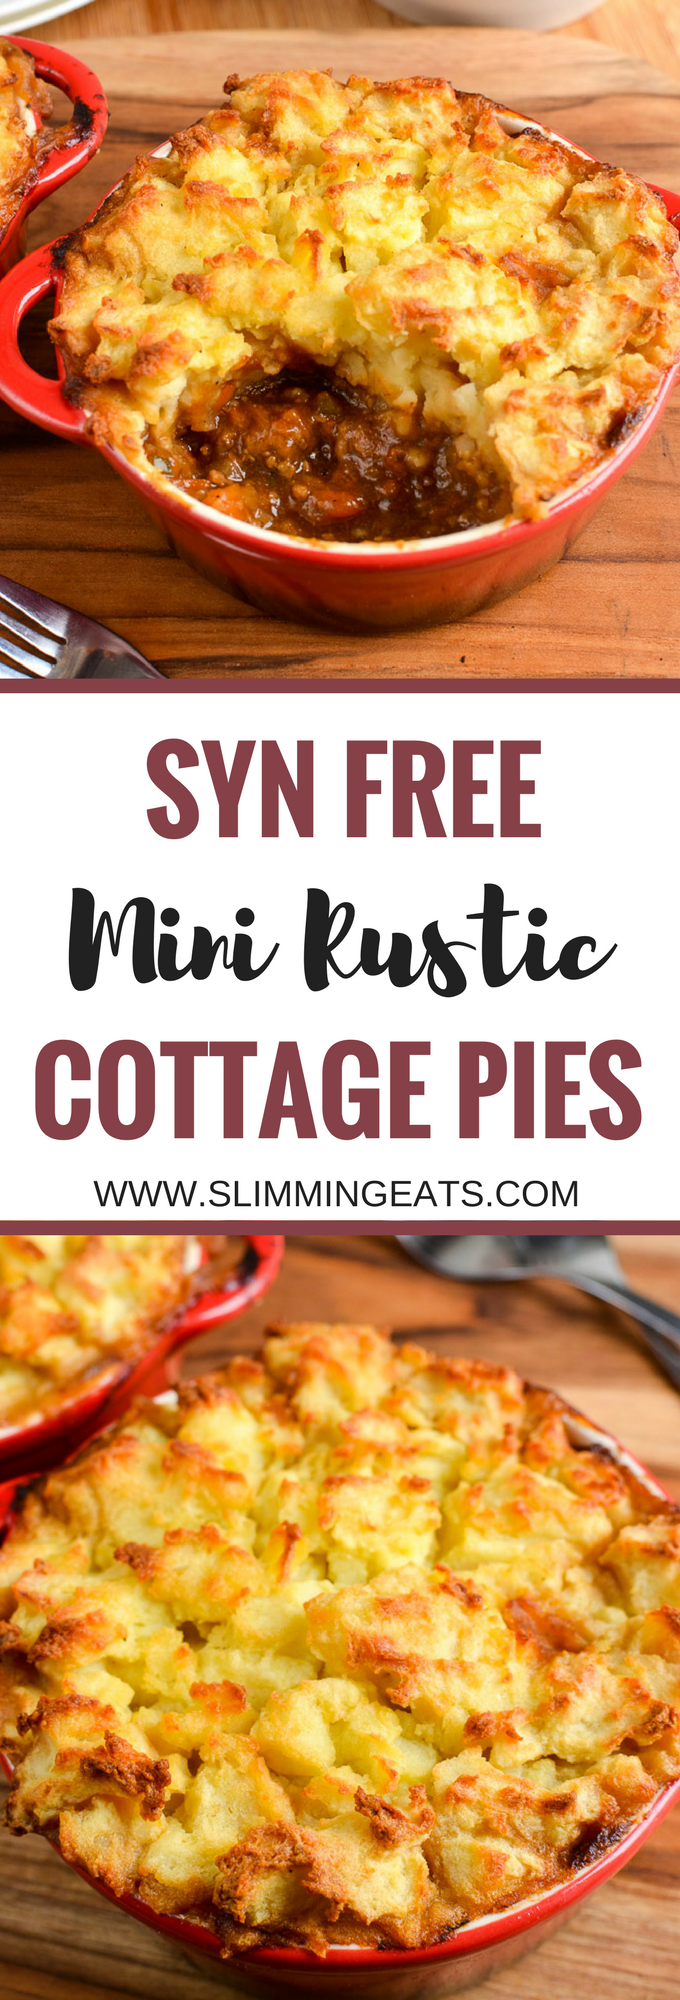 Slimming Eats Syn Free Mini Cottage Pies - gluten free, dairy free, paleo, Slimming World and Weight Watchers friendly